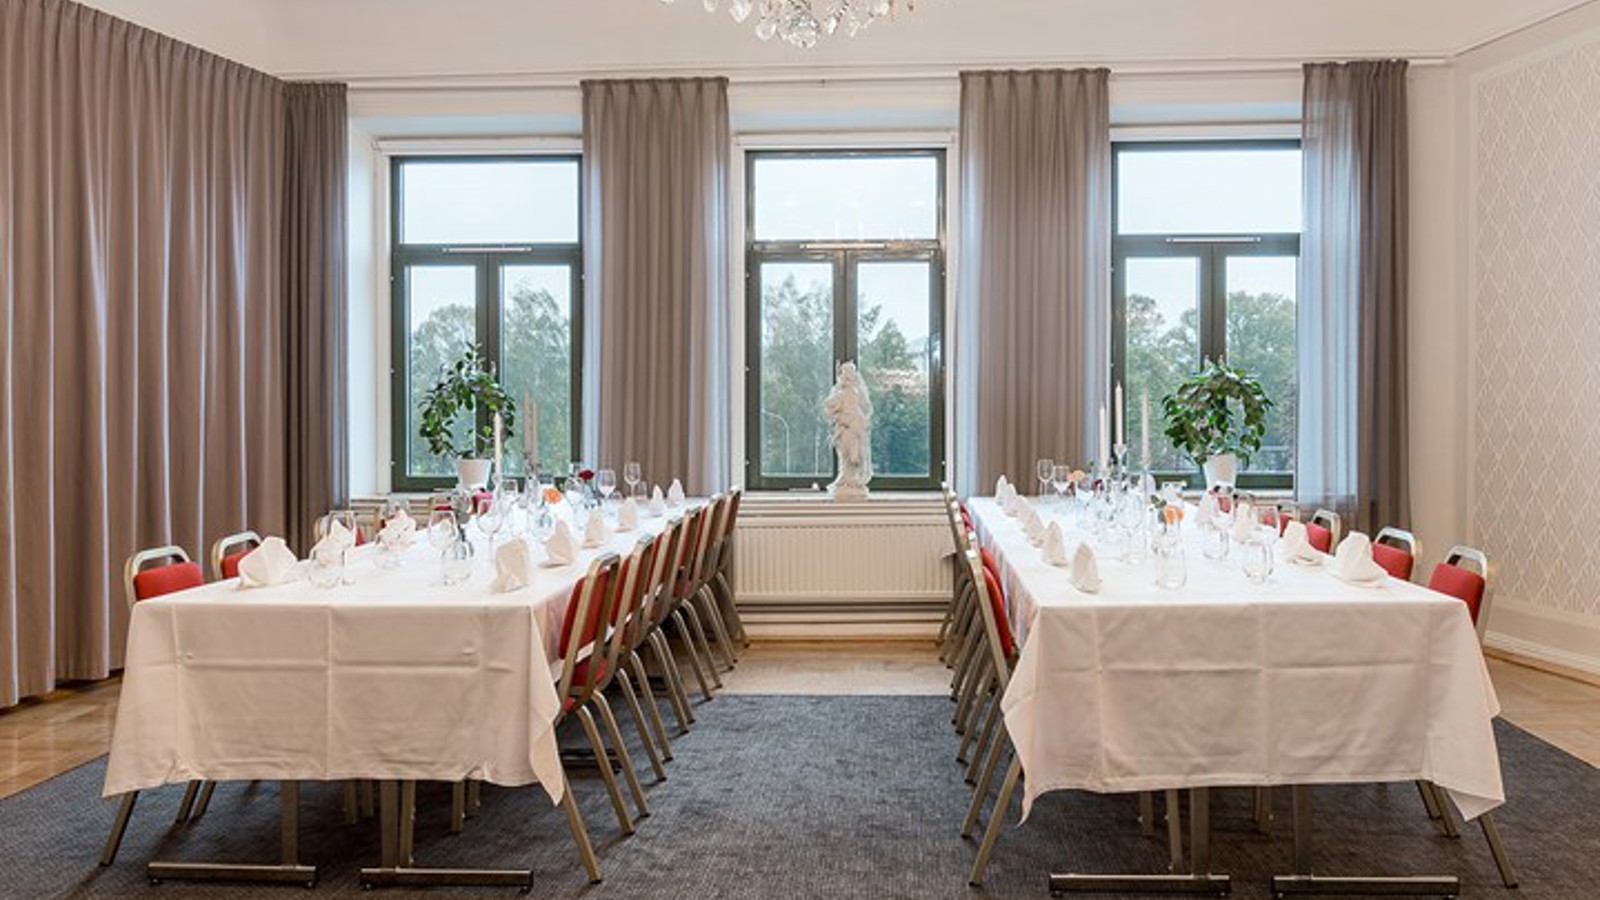 Room long tables, white tablecloths, large windows and draperies